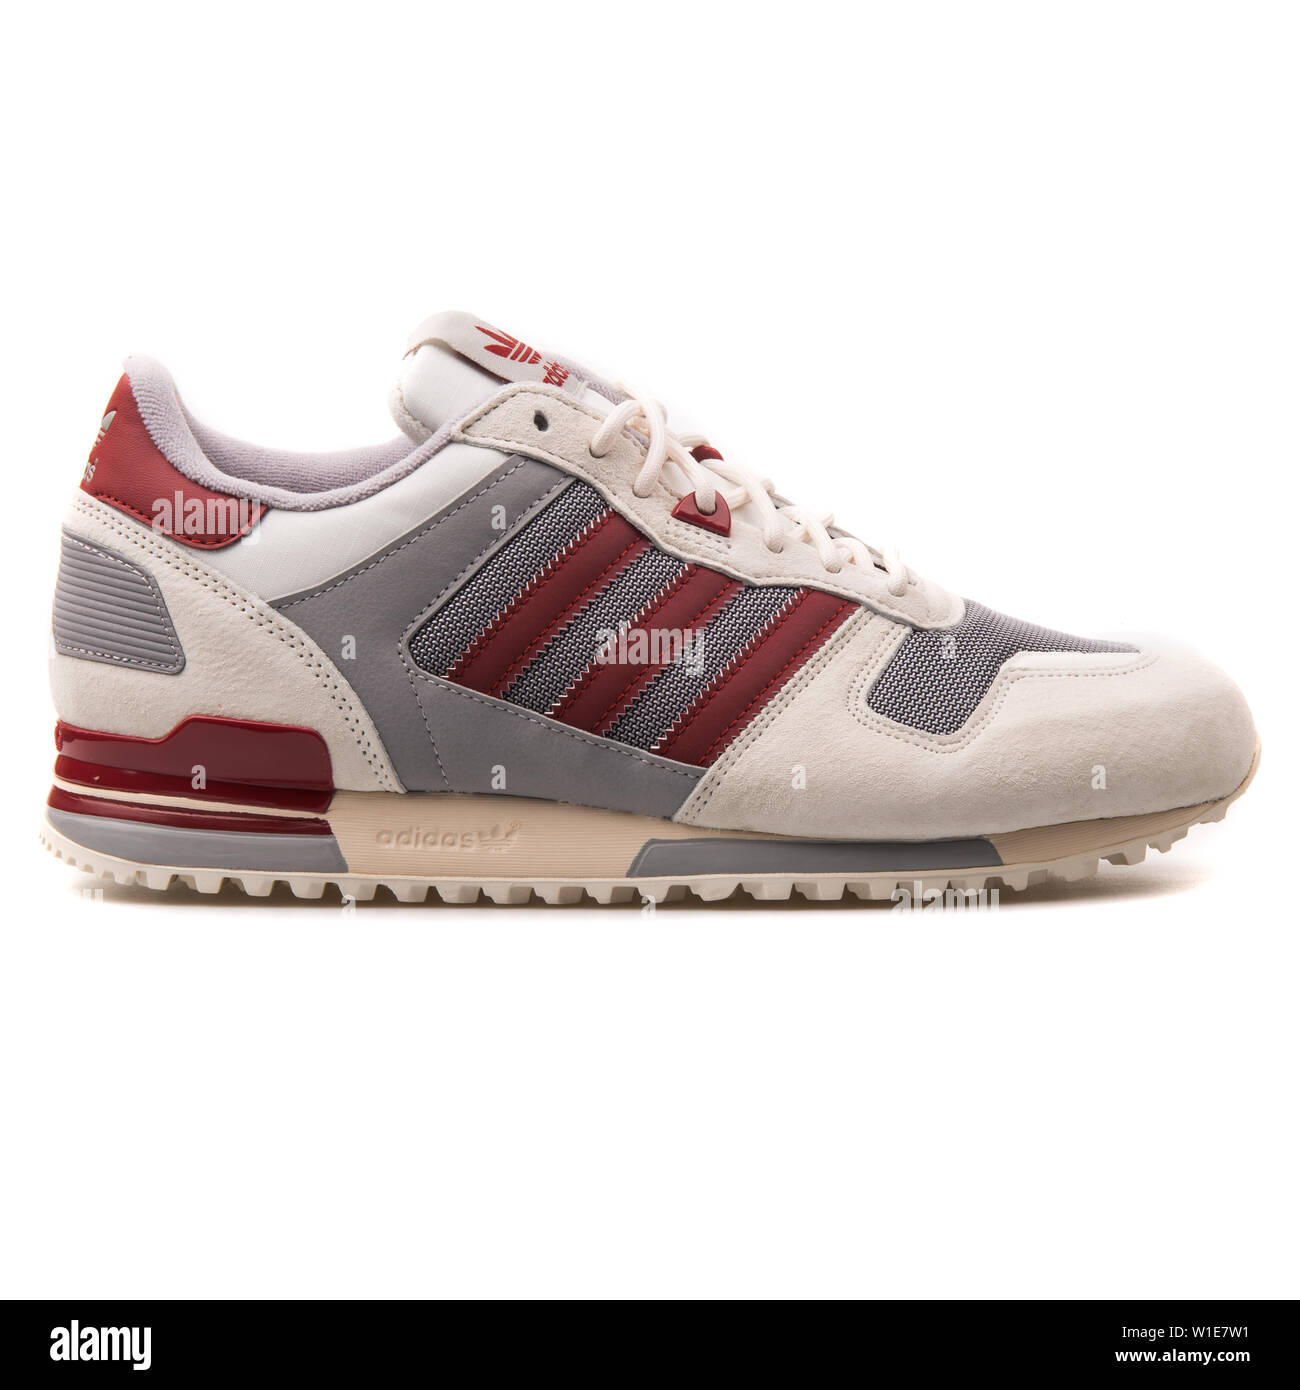 VIENNA, AUSTRIA - AUGUST 25, 2017: Adidas ZX 700 white, grey and red  sneaker on white background Stock Photo - Alamy